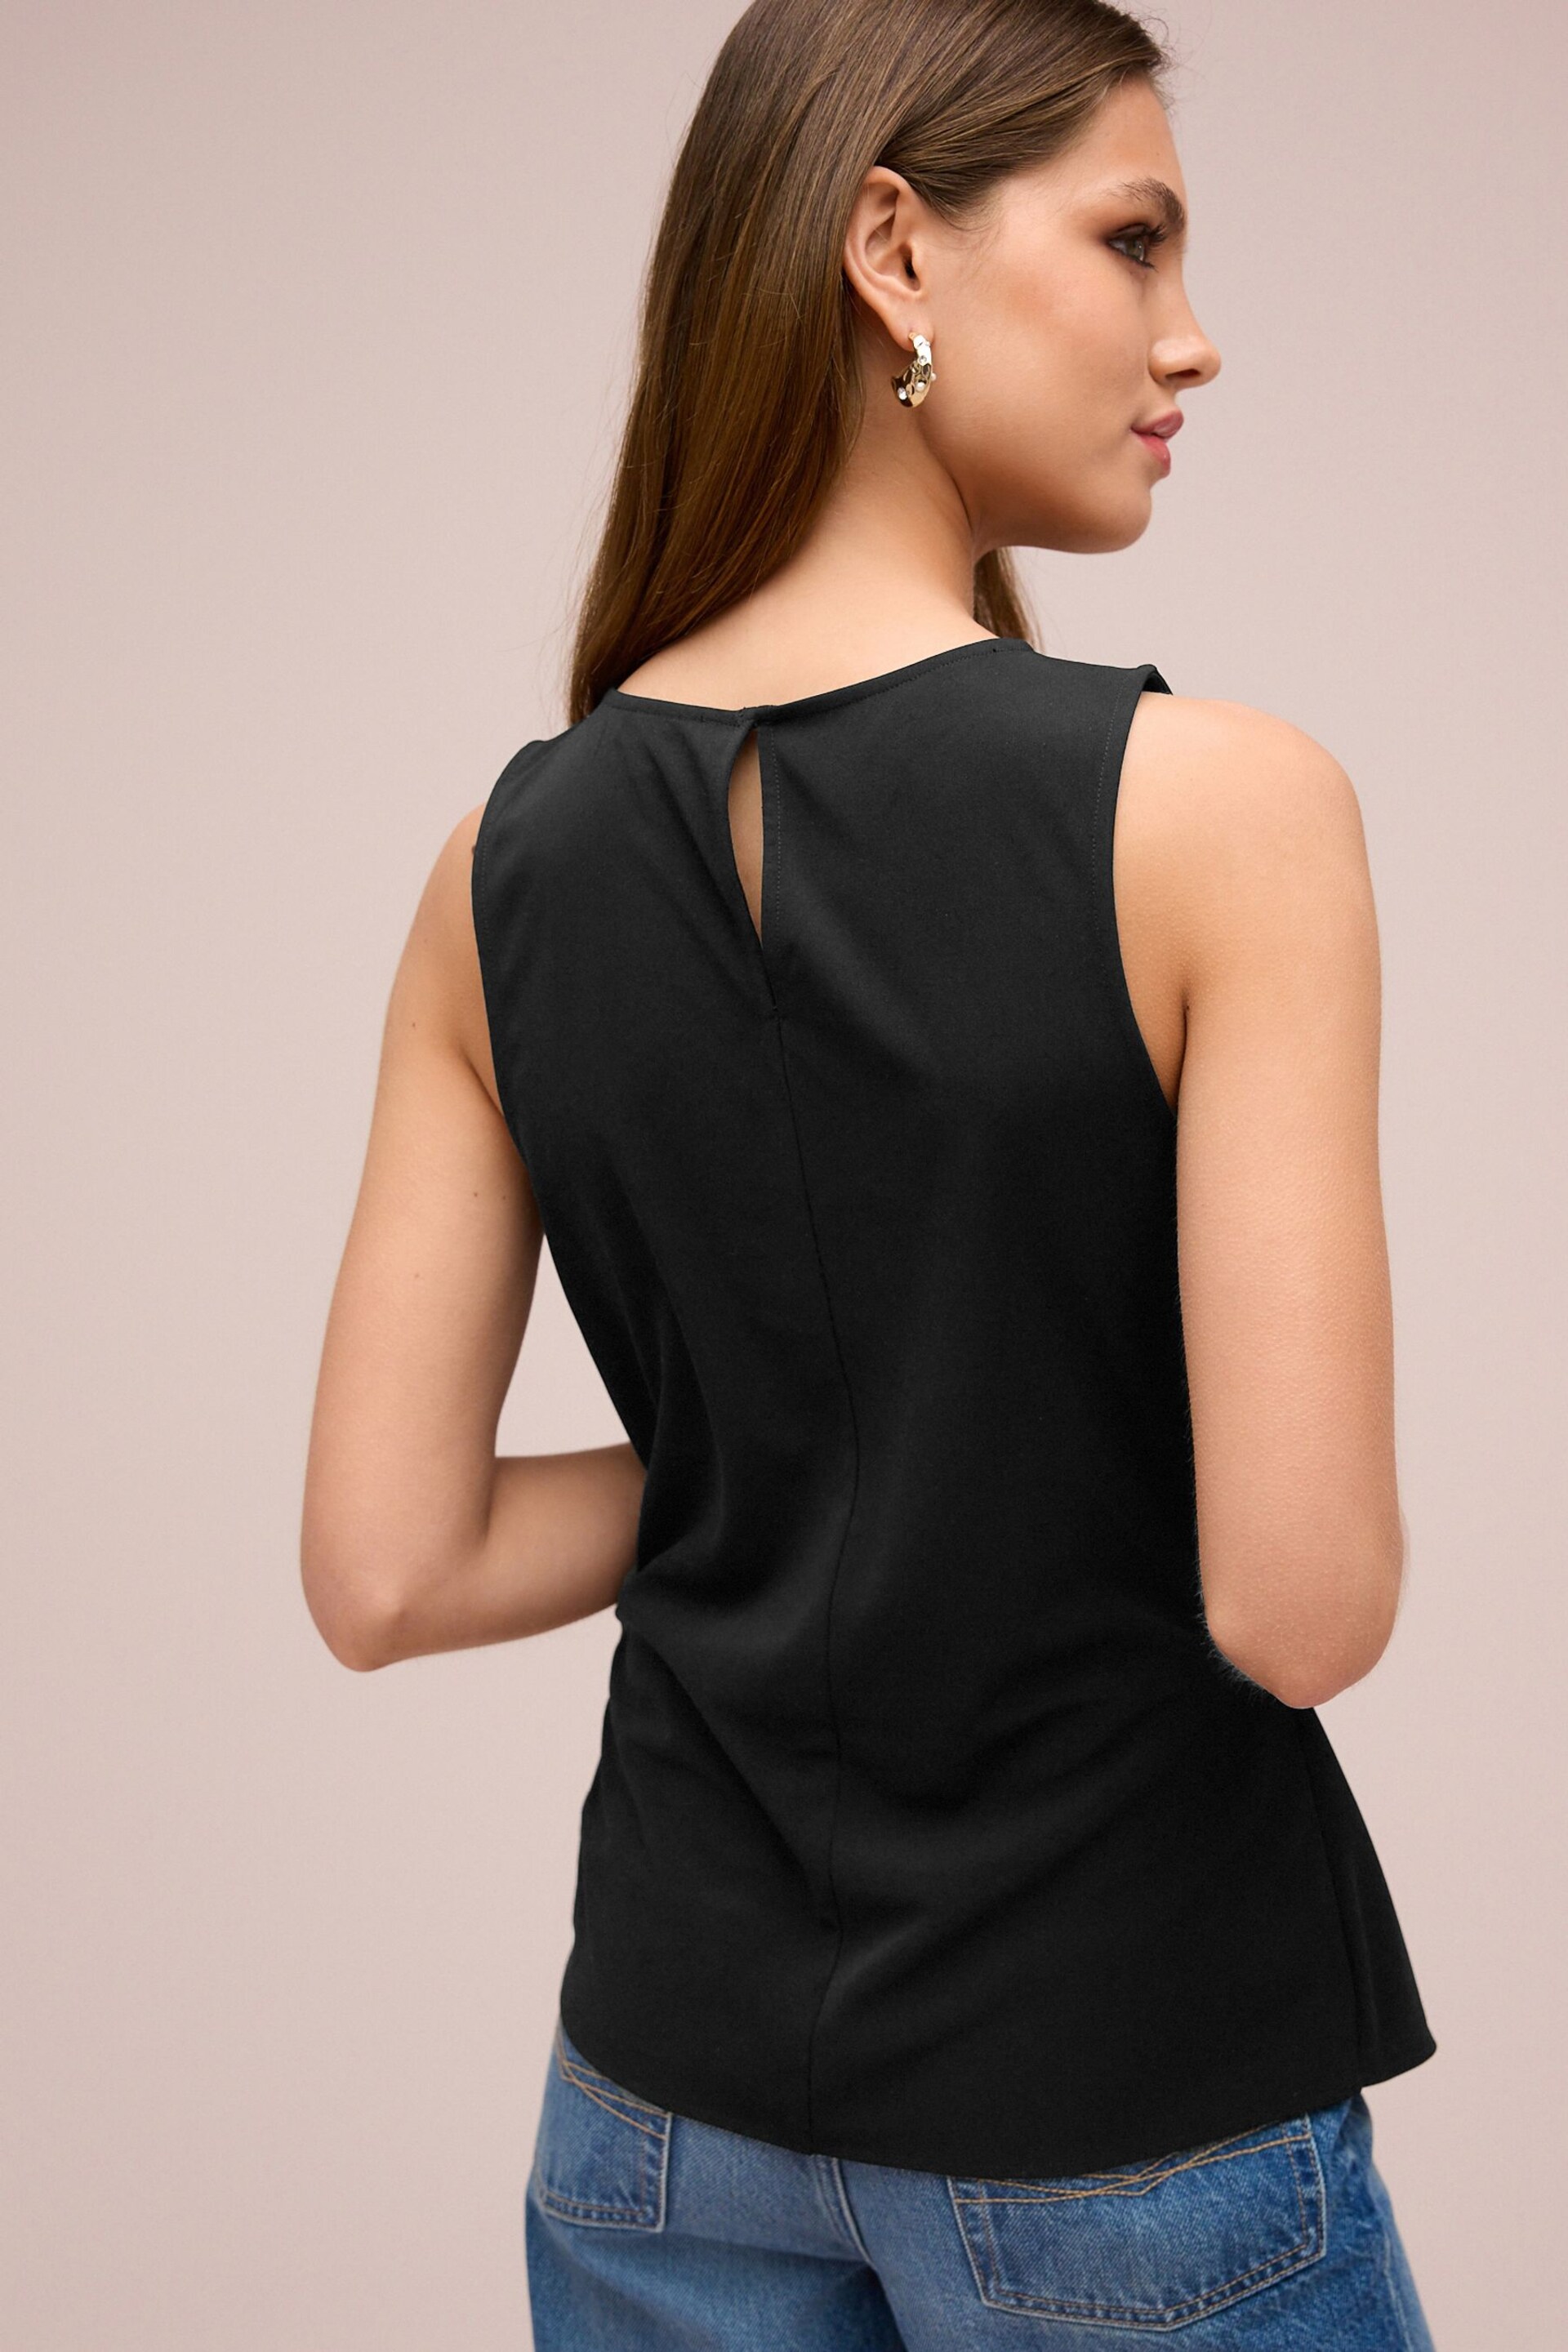 Black Bow Detail Jersey Sleeveless Top - Image 3 of 6